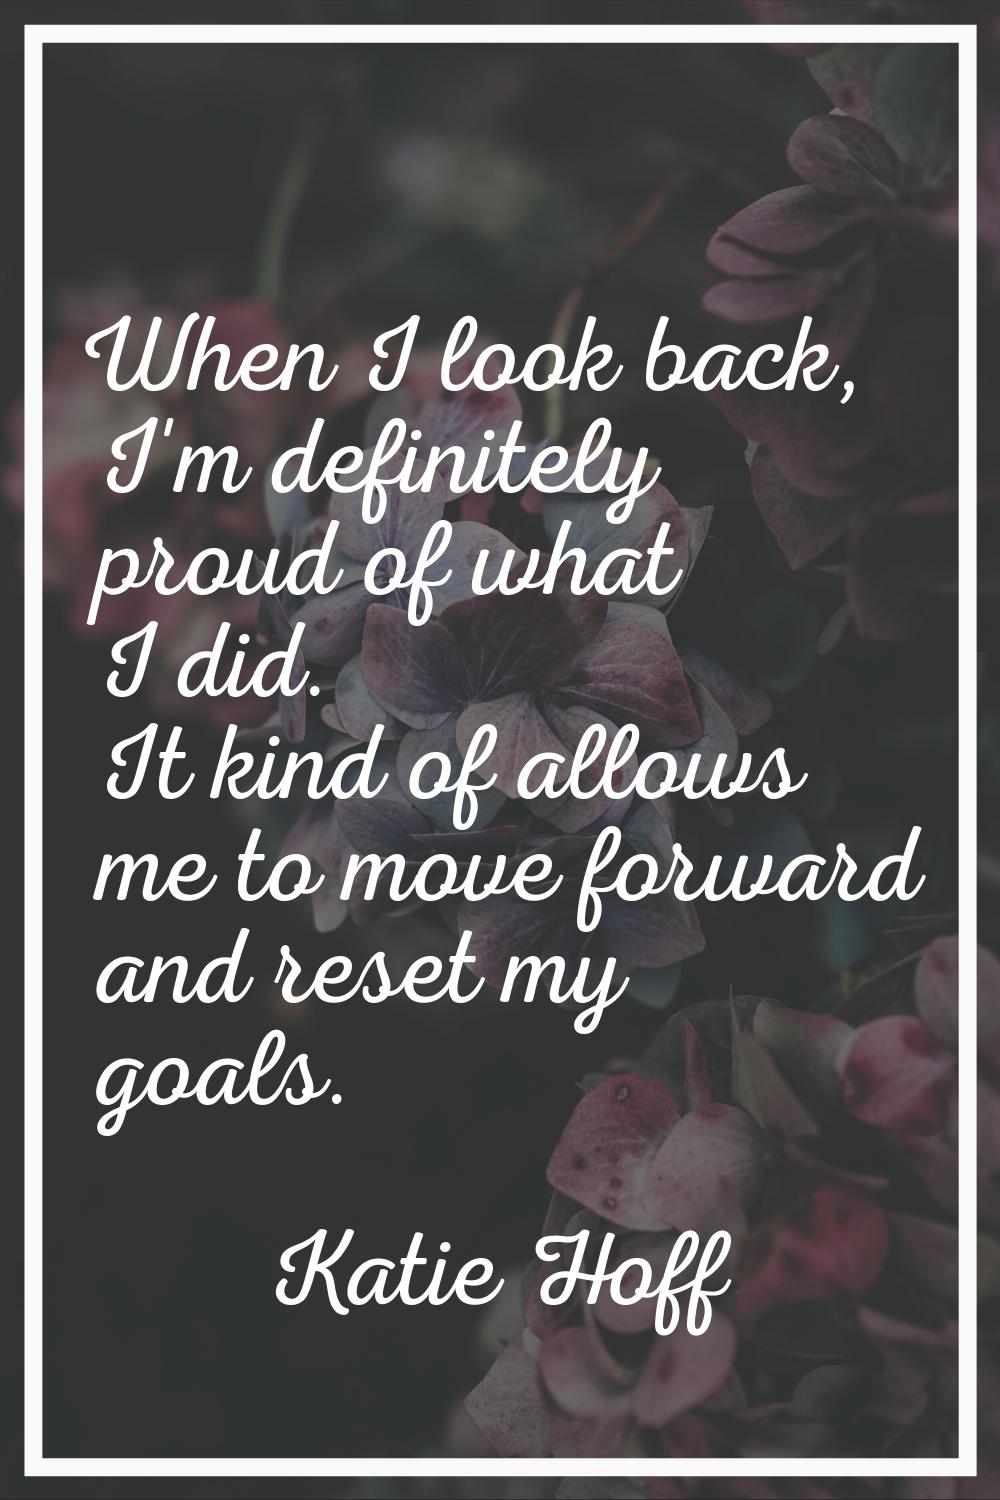 When I look back, I'm definitely proud of what I did. It kind of allows me to move forward and rese